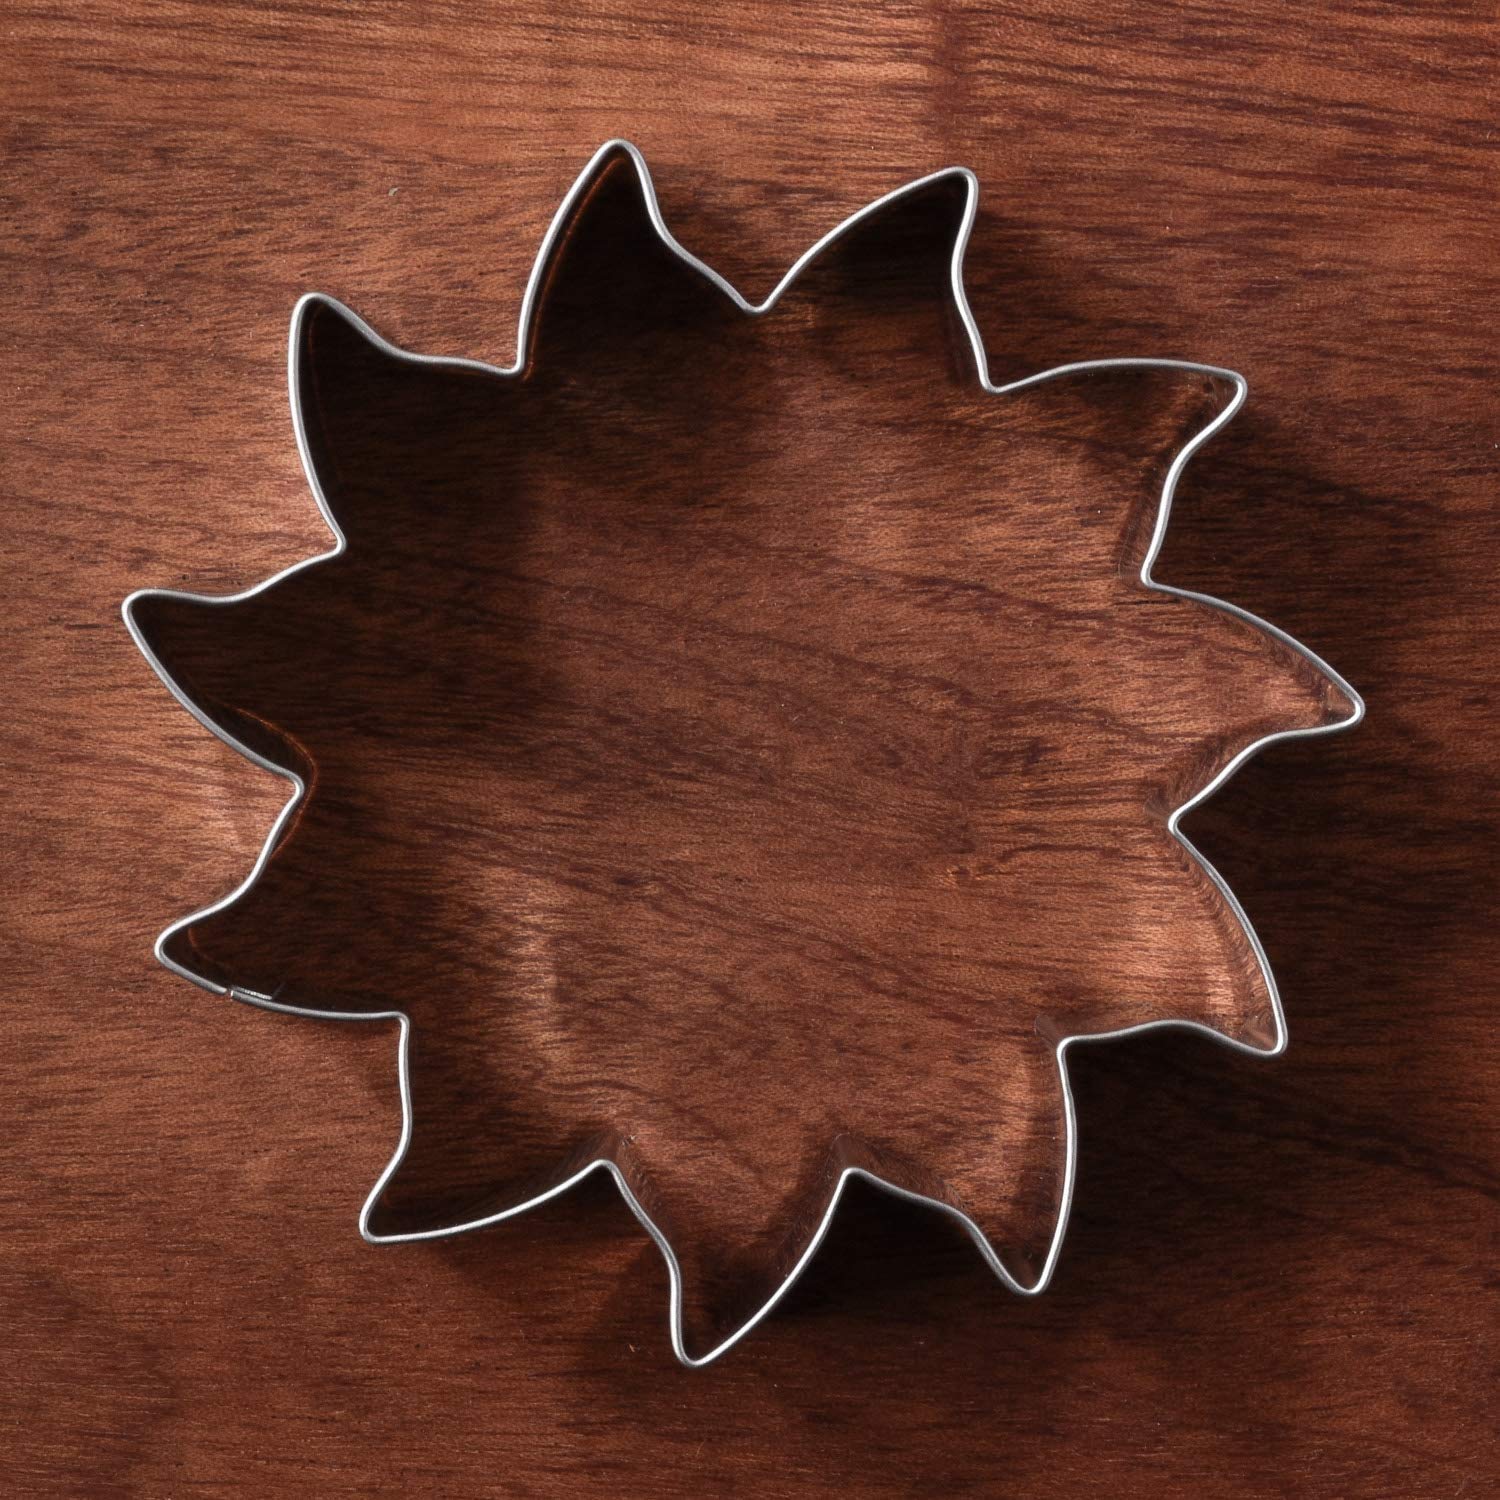 LILIAO Sun Cookie Cutter - 3.6 x 3.6 inches - Stainless Steel